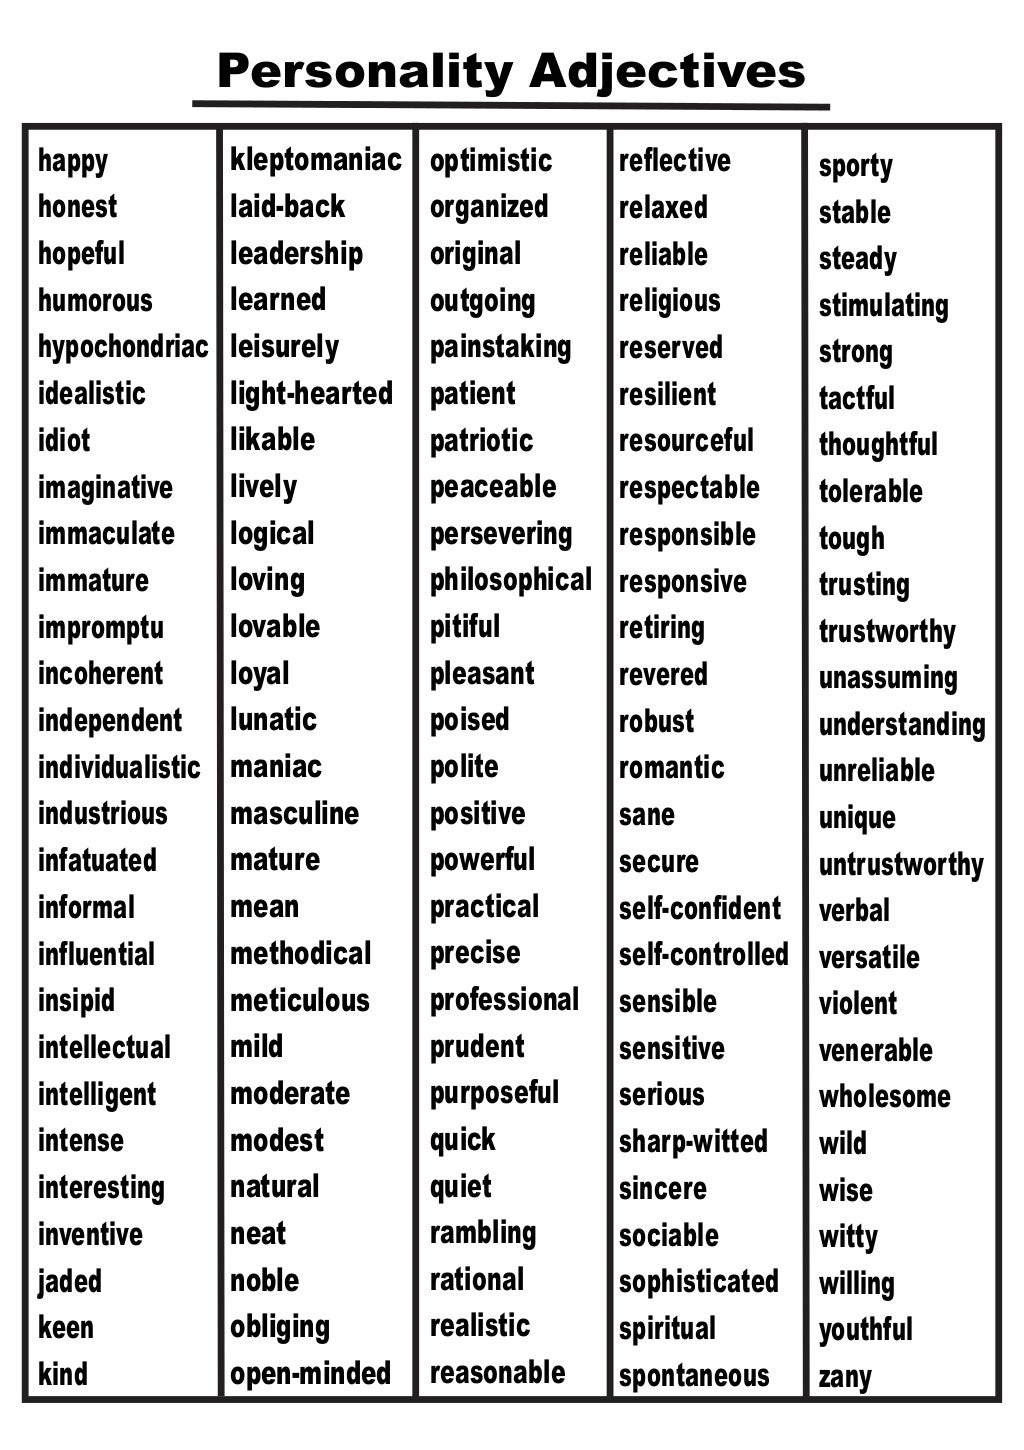 lesson-4-list-of-personality-adjectives